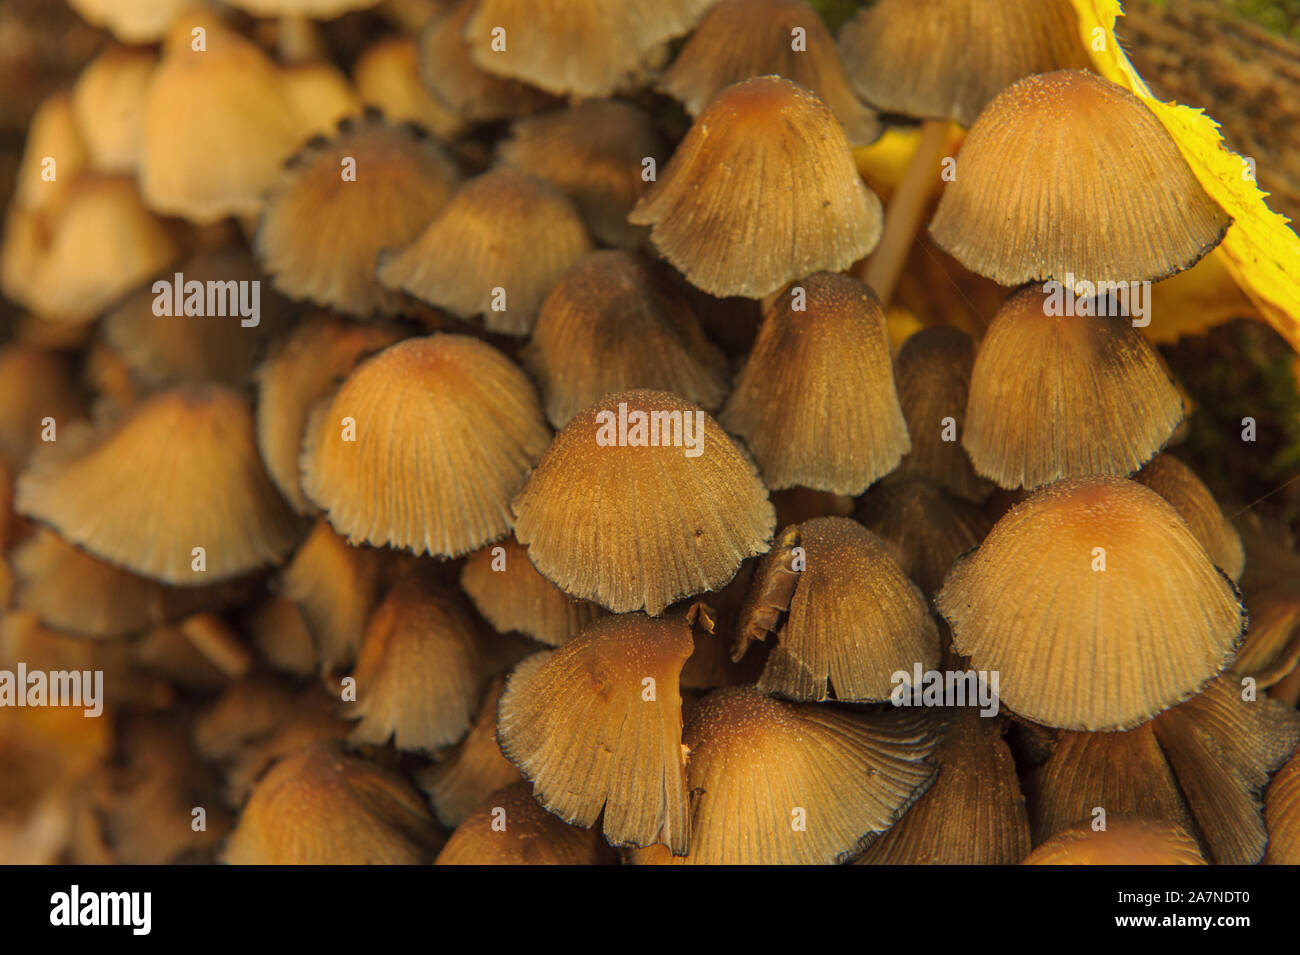 Assemblage of inedible mushrooms growing on the trunk of an overturned tree close up Stock Photo